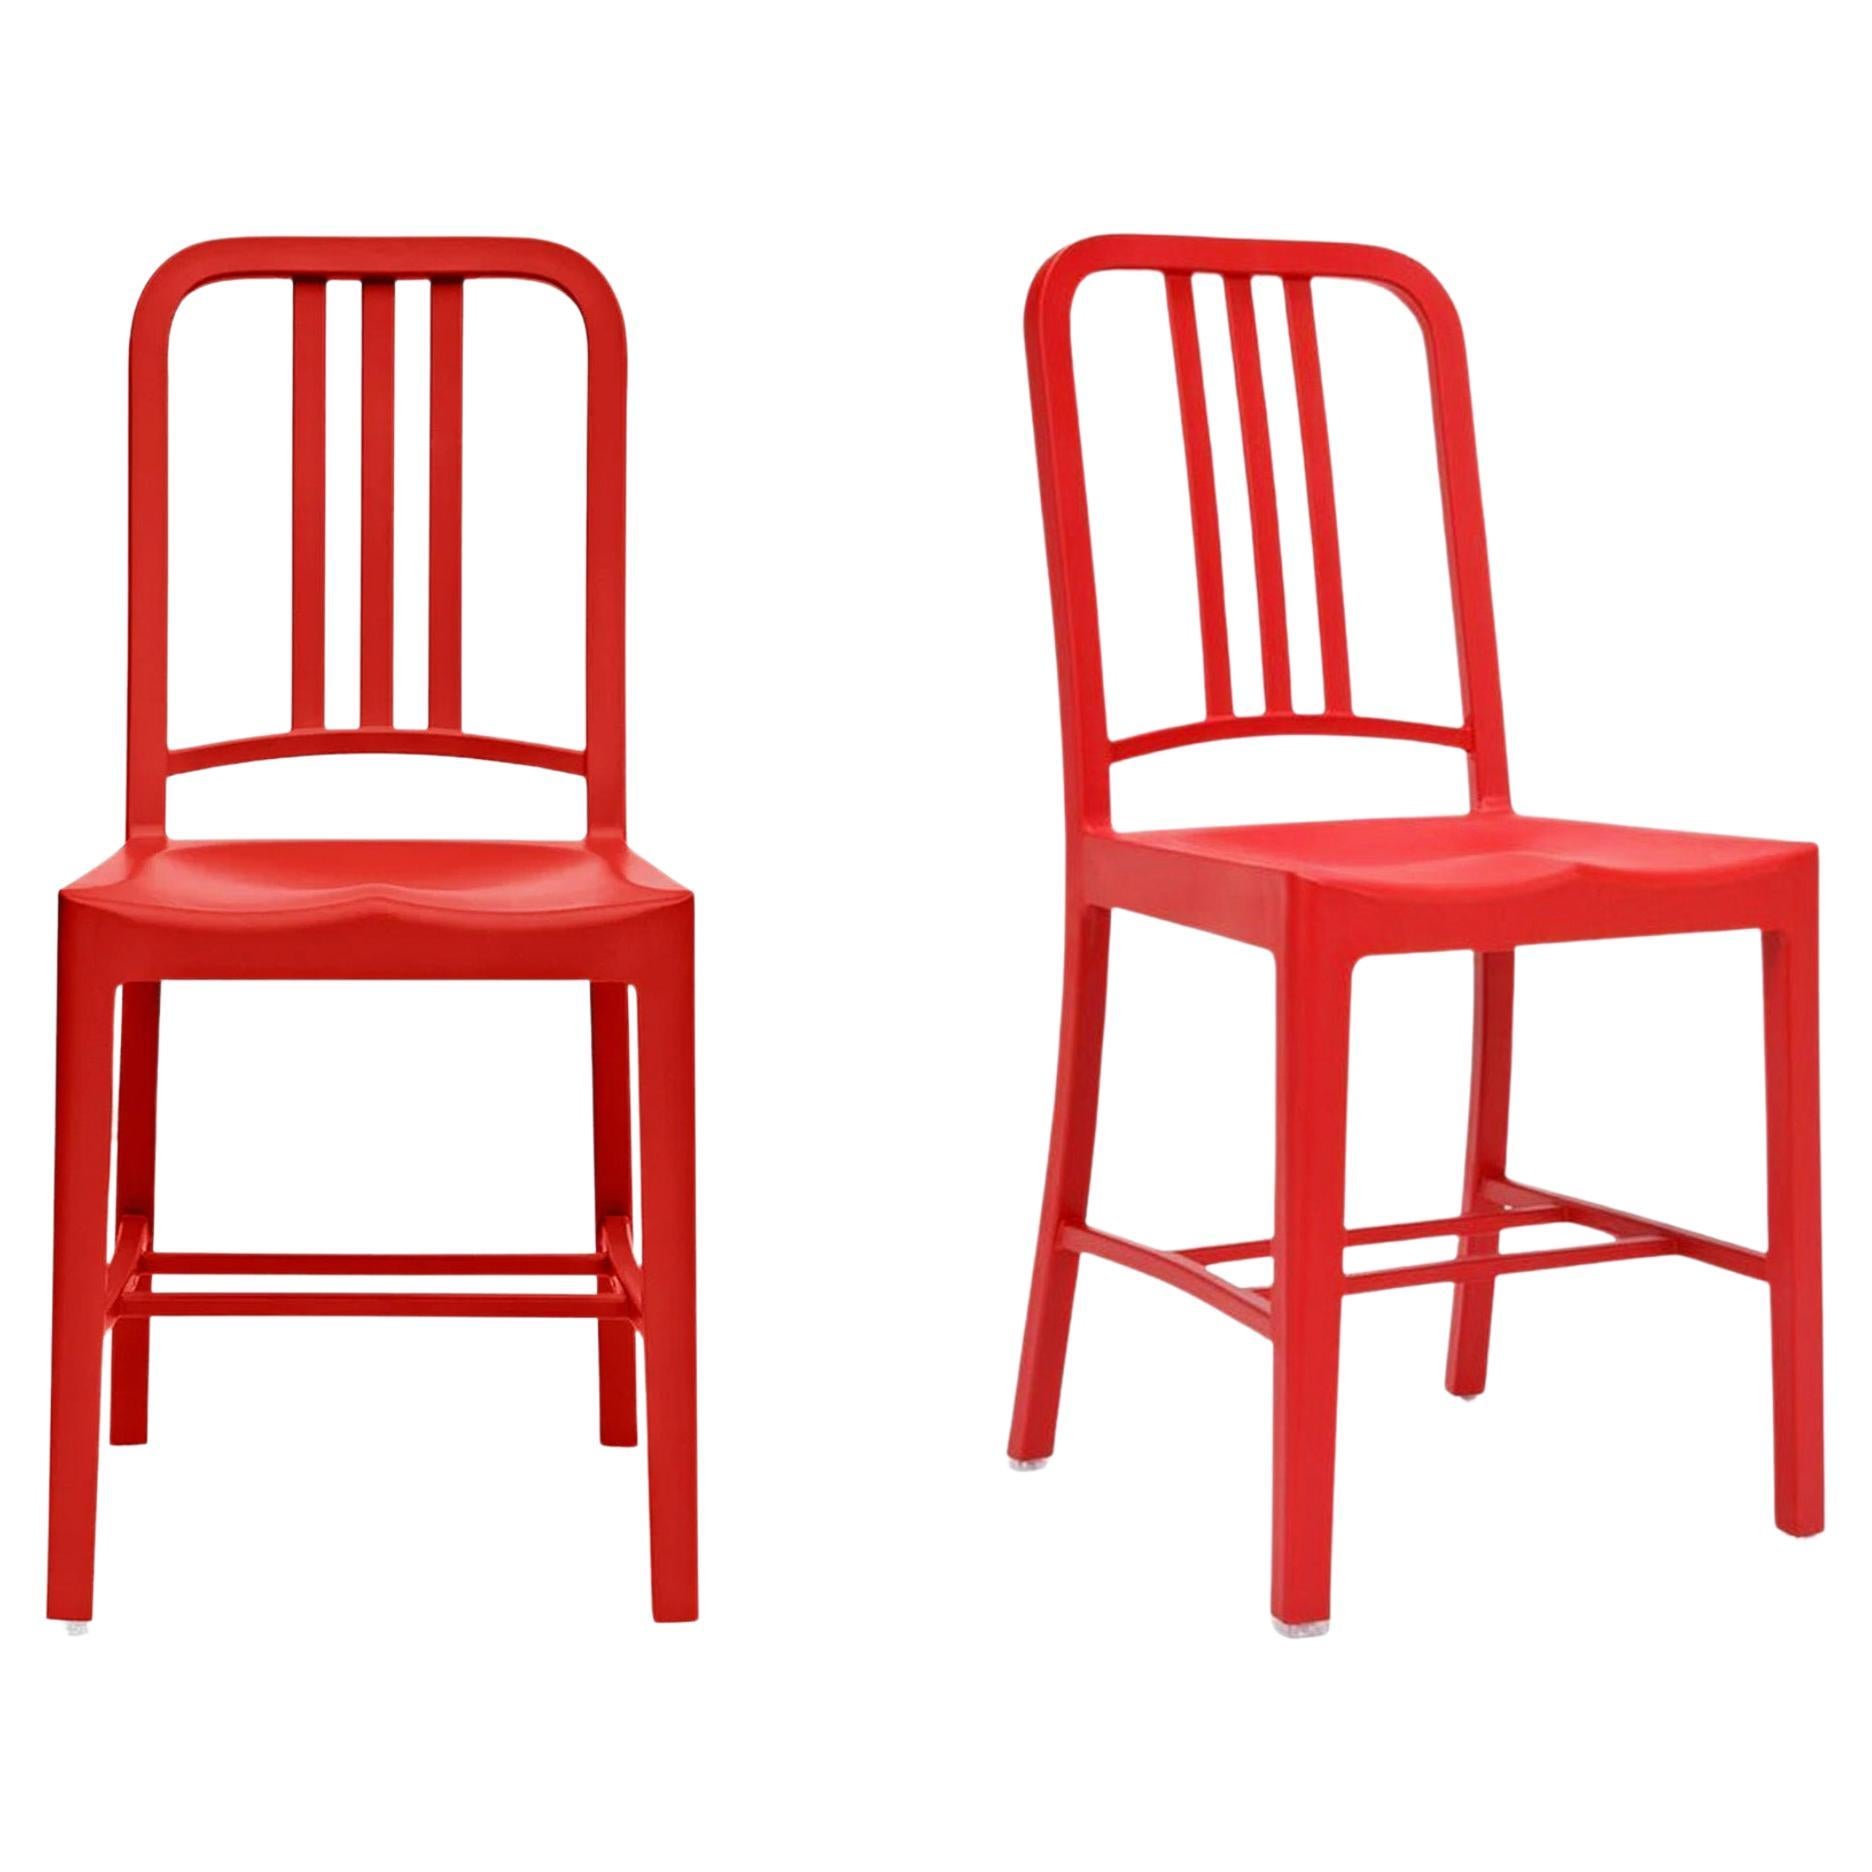 Emeco 111 Navy Chairs by Coca-Cola